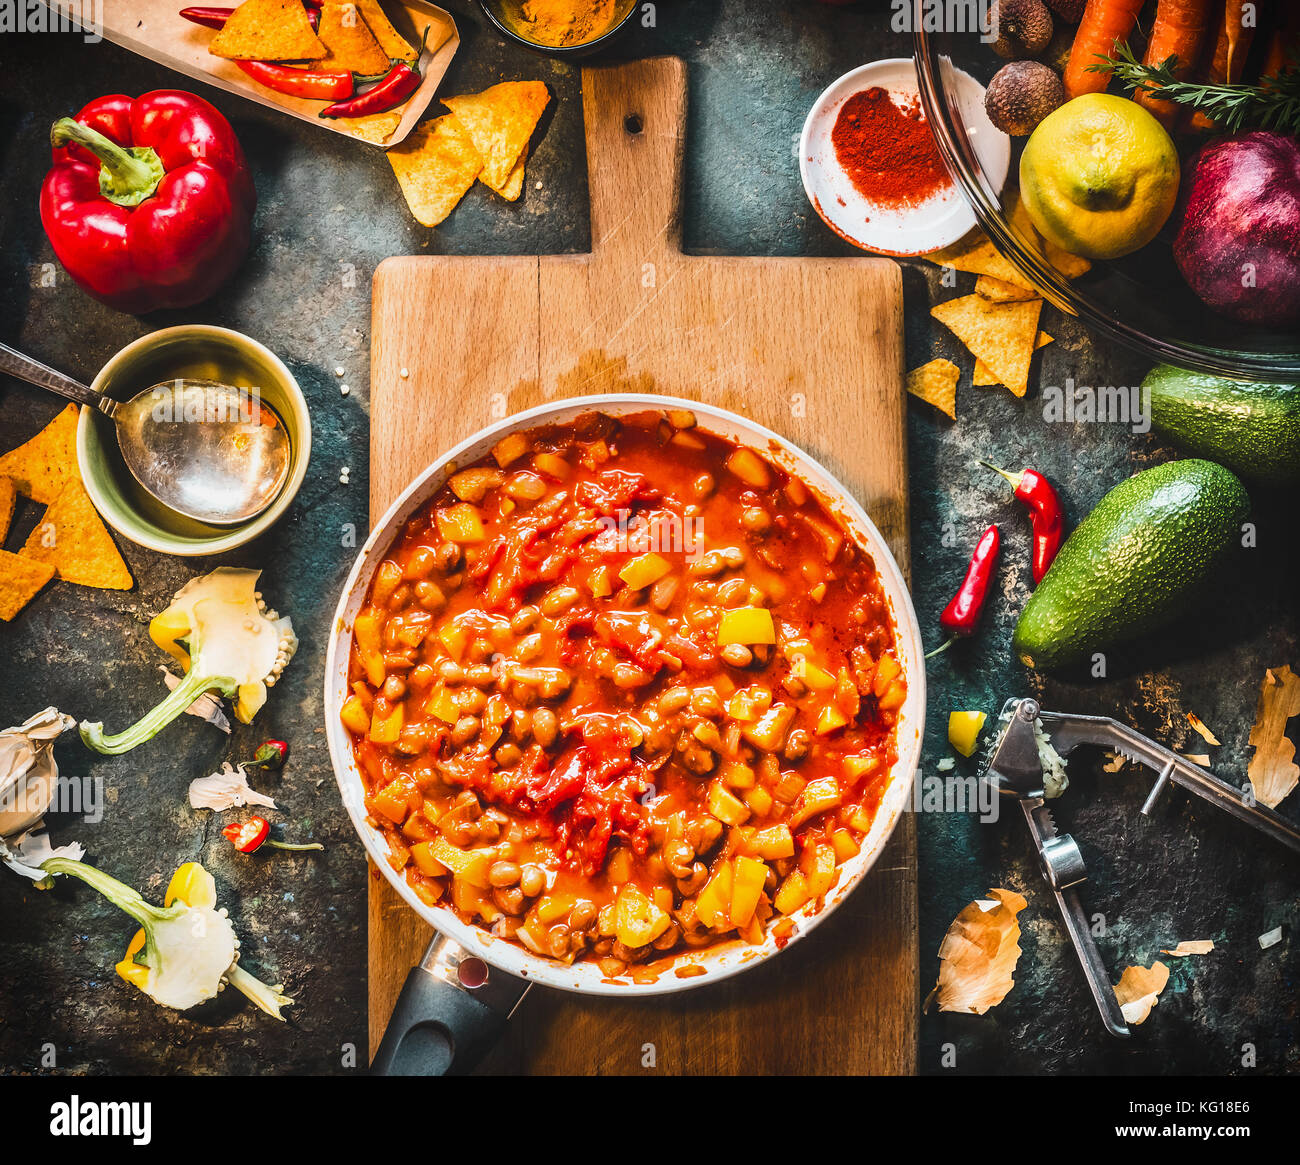 Vegetarian chili con carne dish in pan on wooden cutting board with spices and vegetables cooking ingredients on dark kitchen table background, top vi Stock Photo